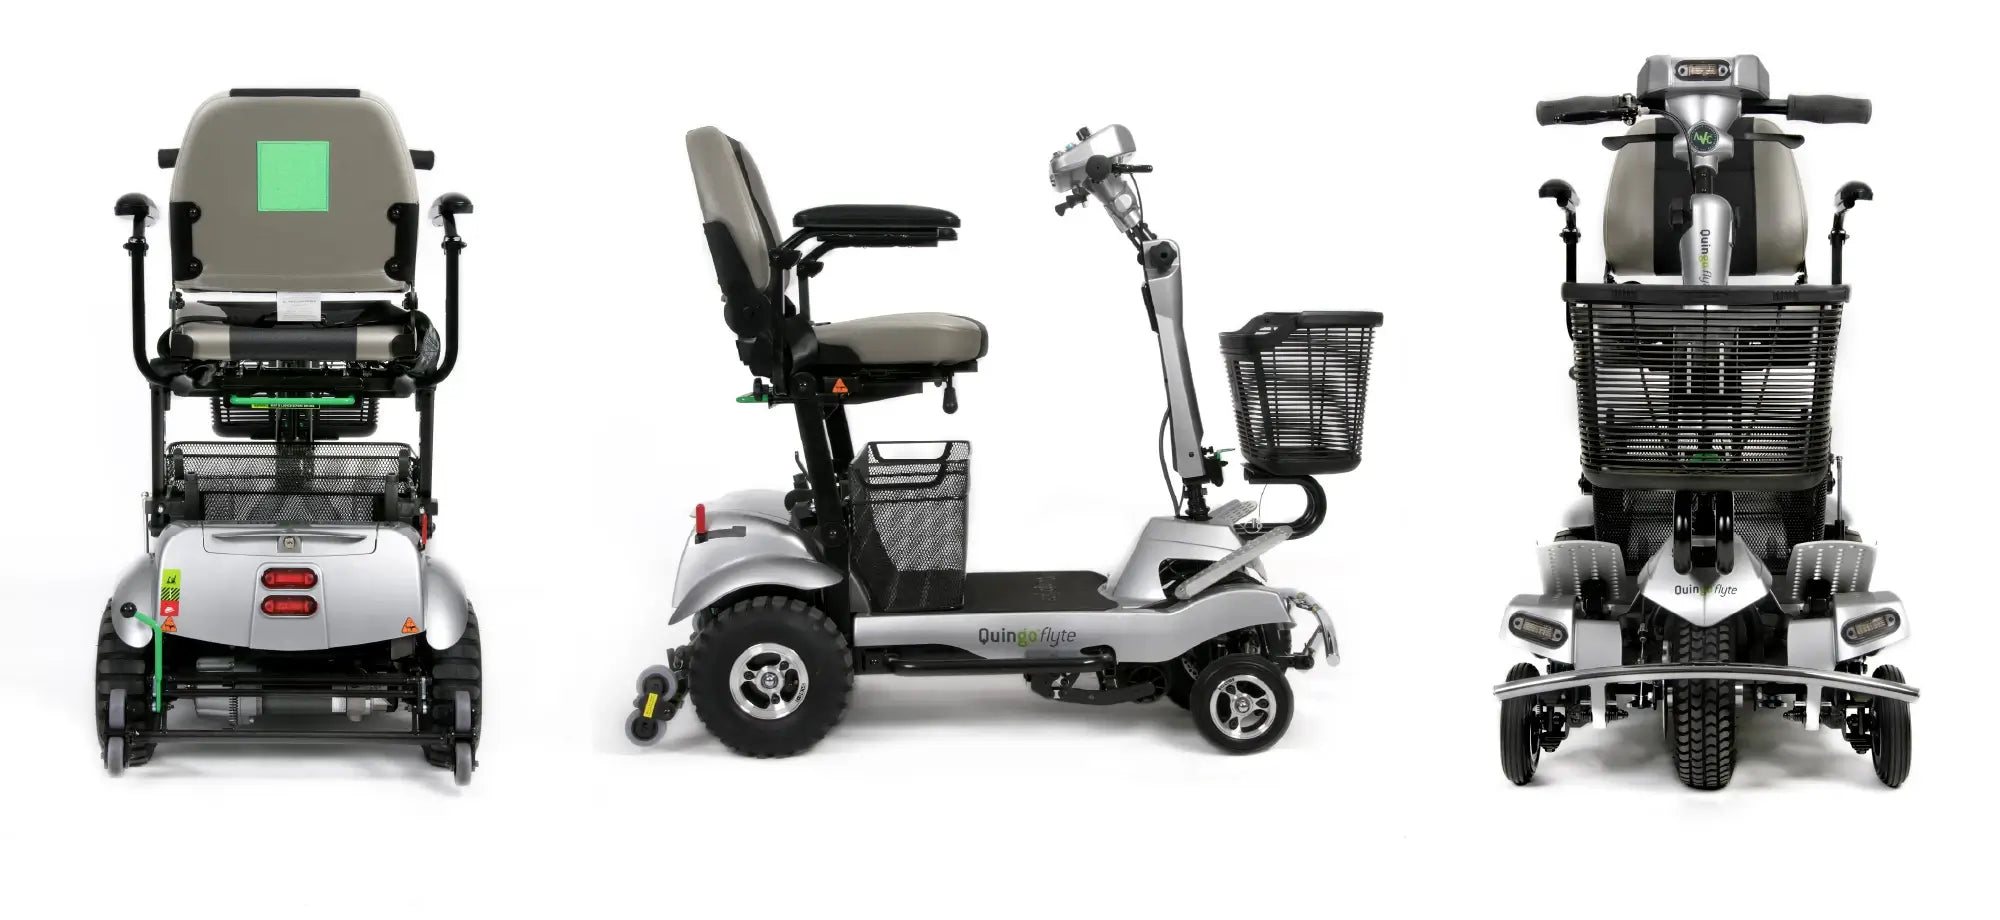 Quingo - Ultra Portable Mobility Scooter - 18 mile range - 294lbs weight capacity